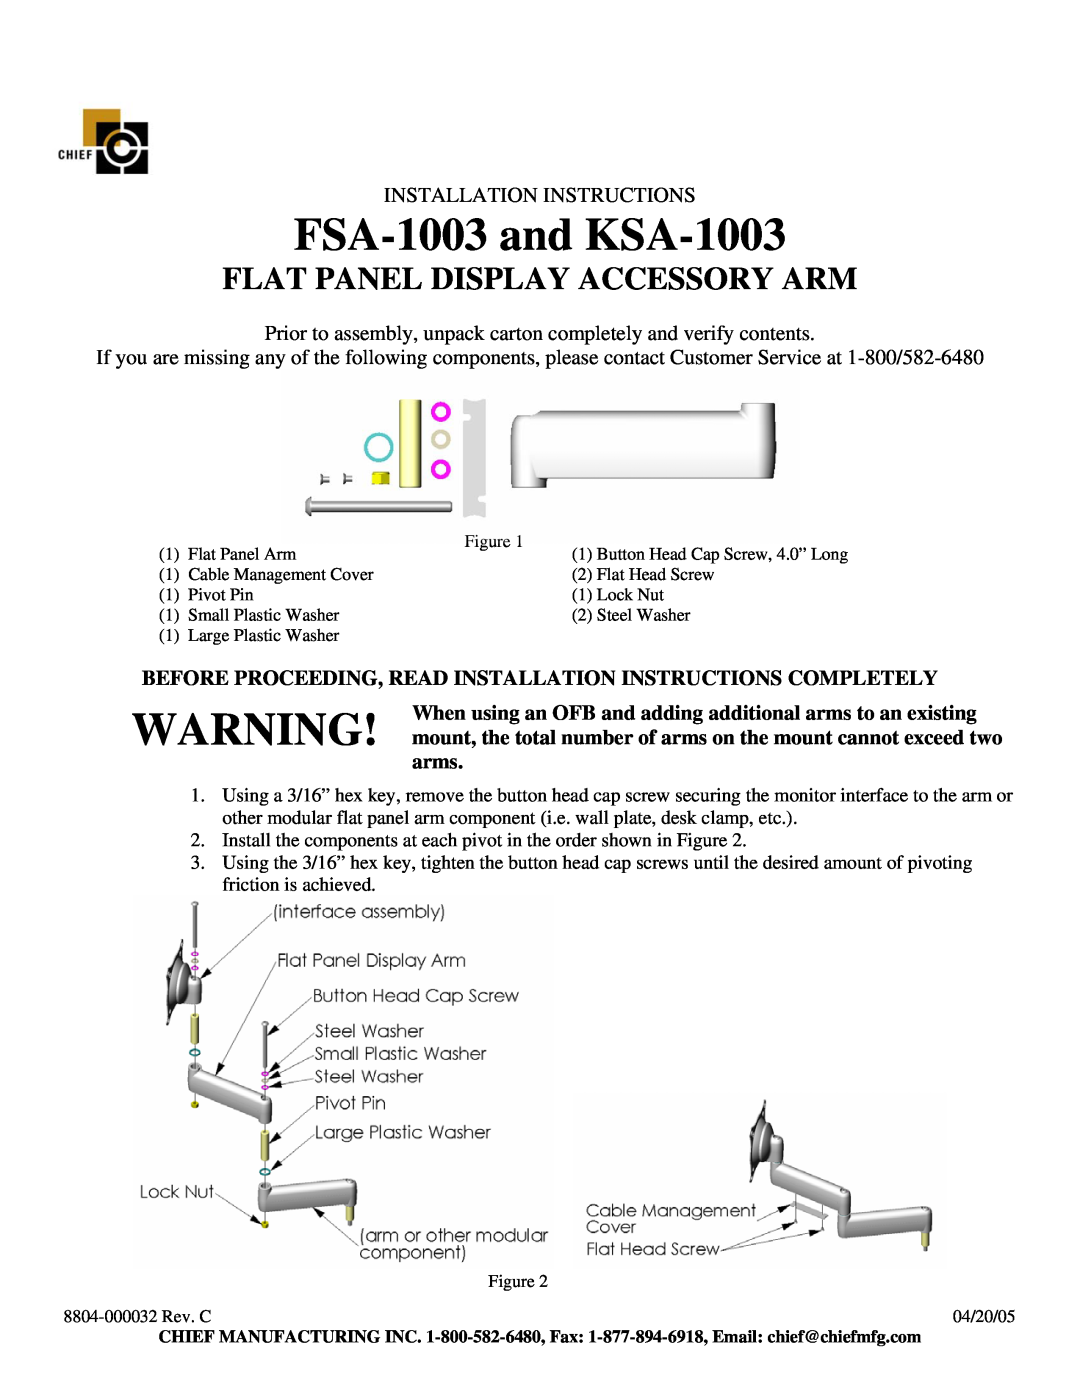 Chief Manufacturing installation instructions FSA-1003and KSA-1003, Flat Panel Display Accessory Arm 